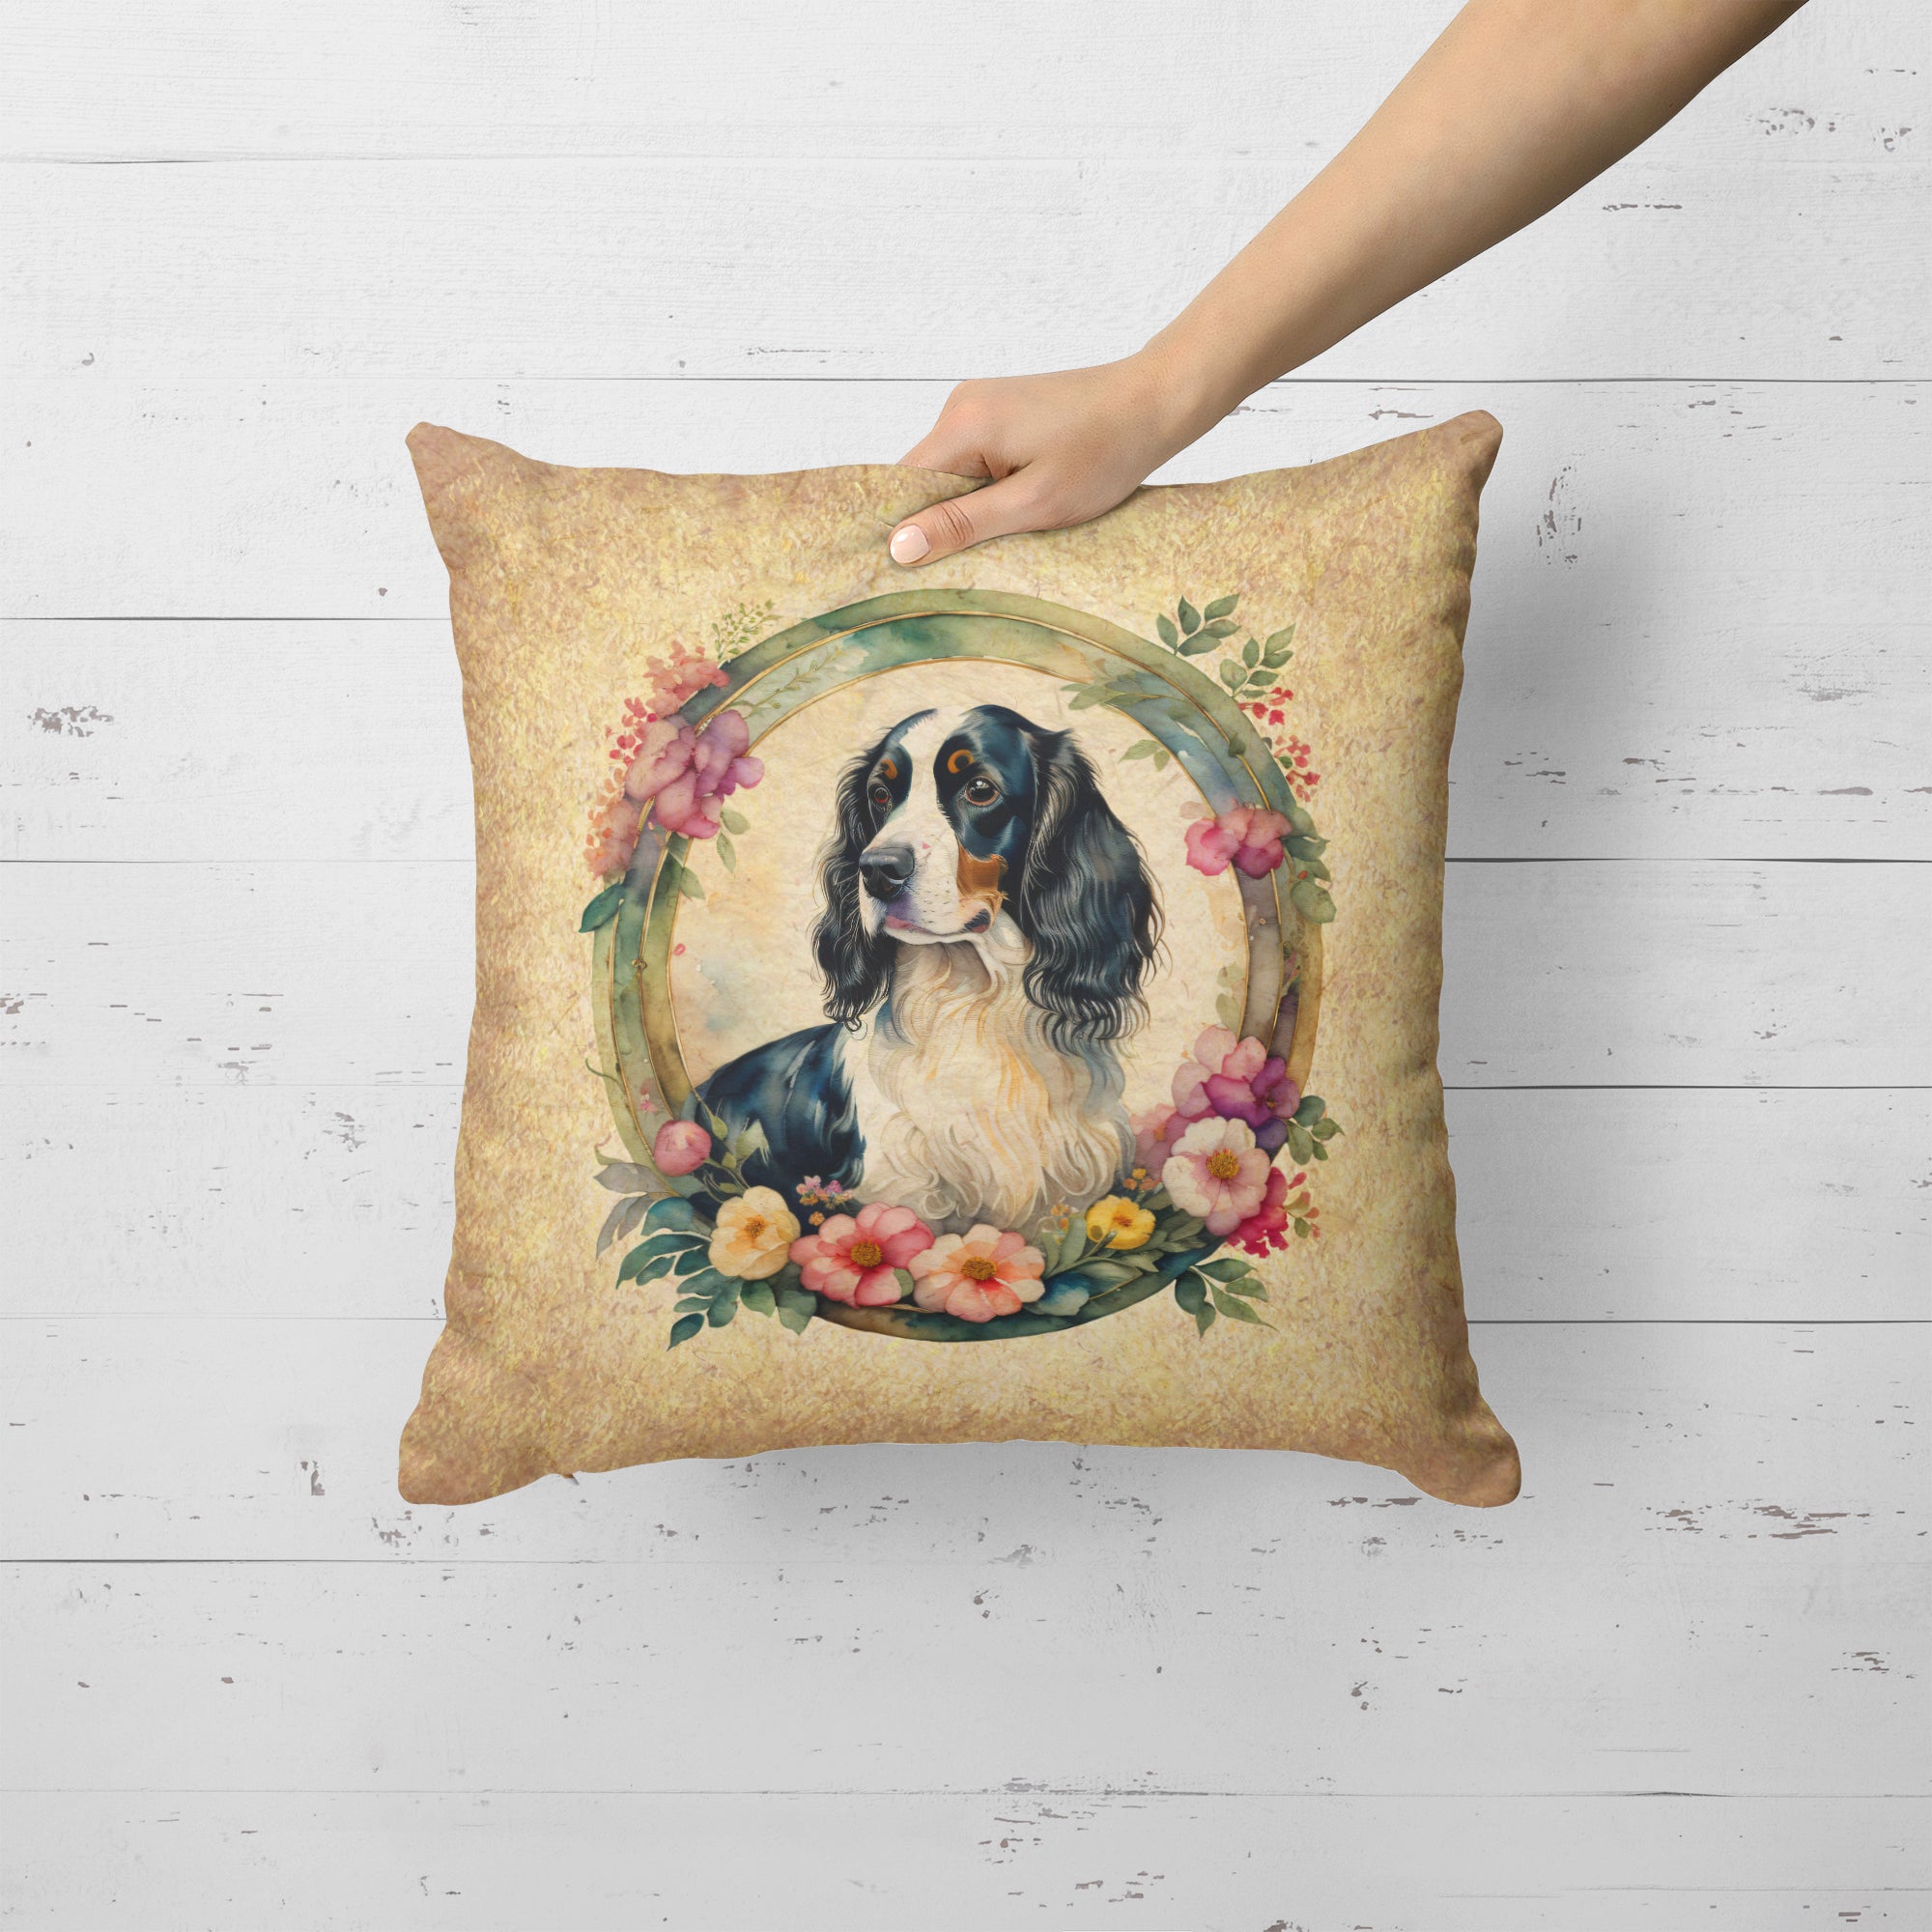 Buy this English Springer Spaniel and Flowers Fabric Decorative Pillow